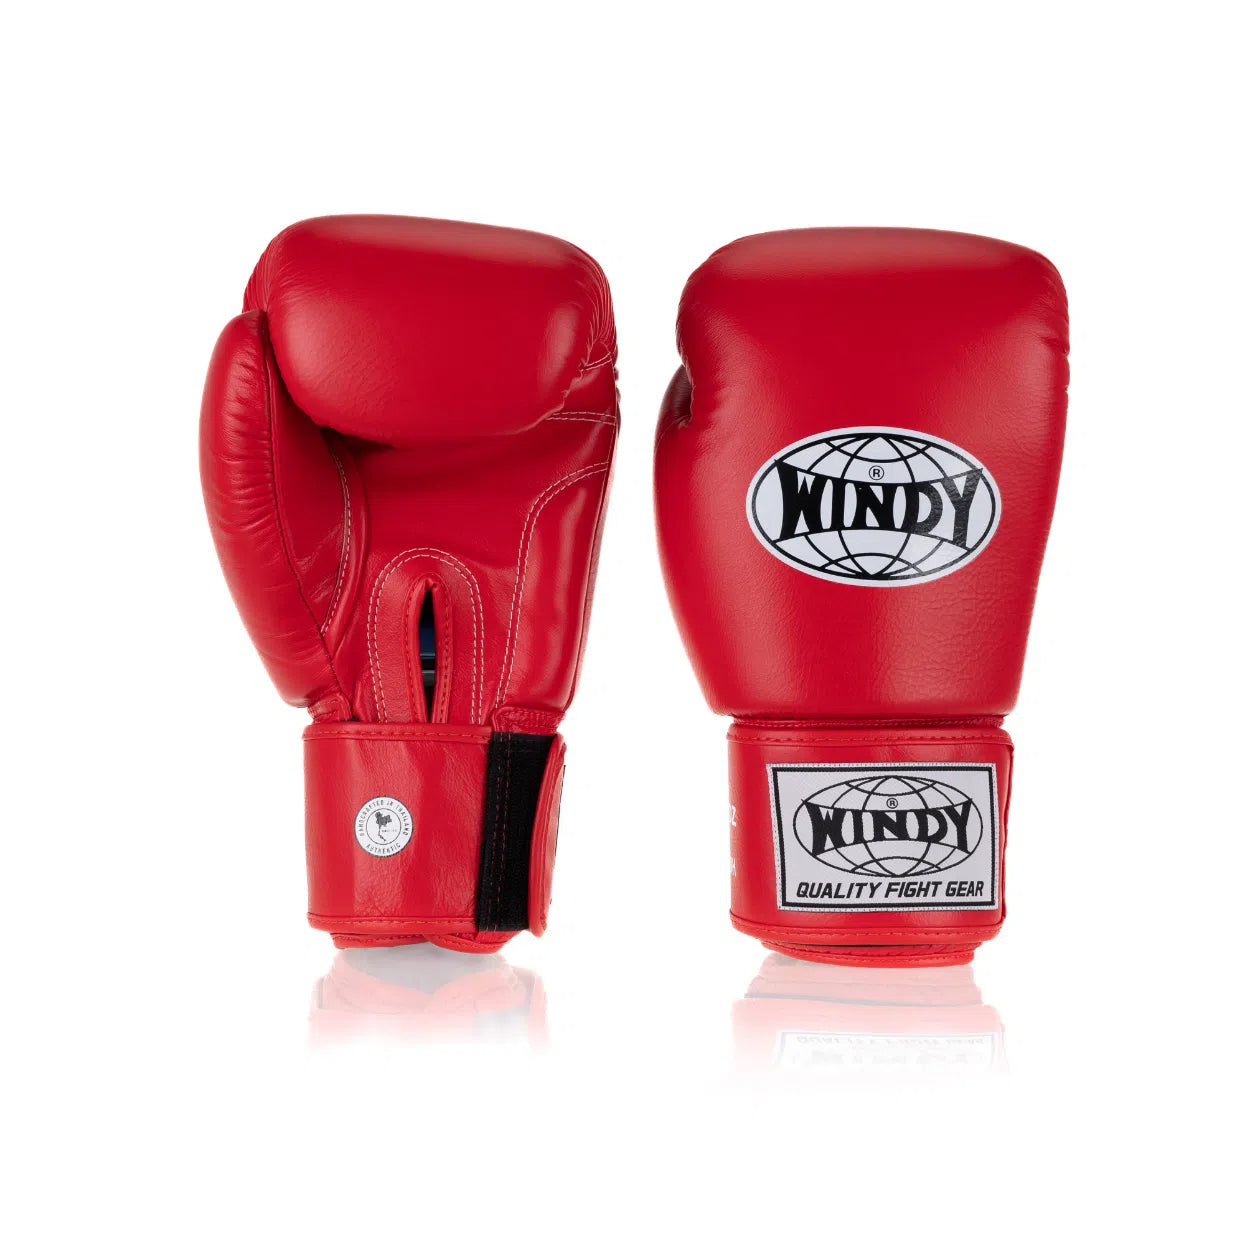 Classic Leather Boxing Glove - Red